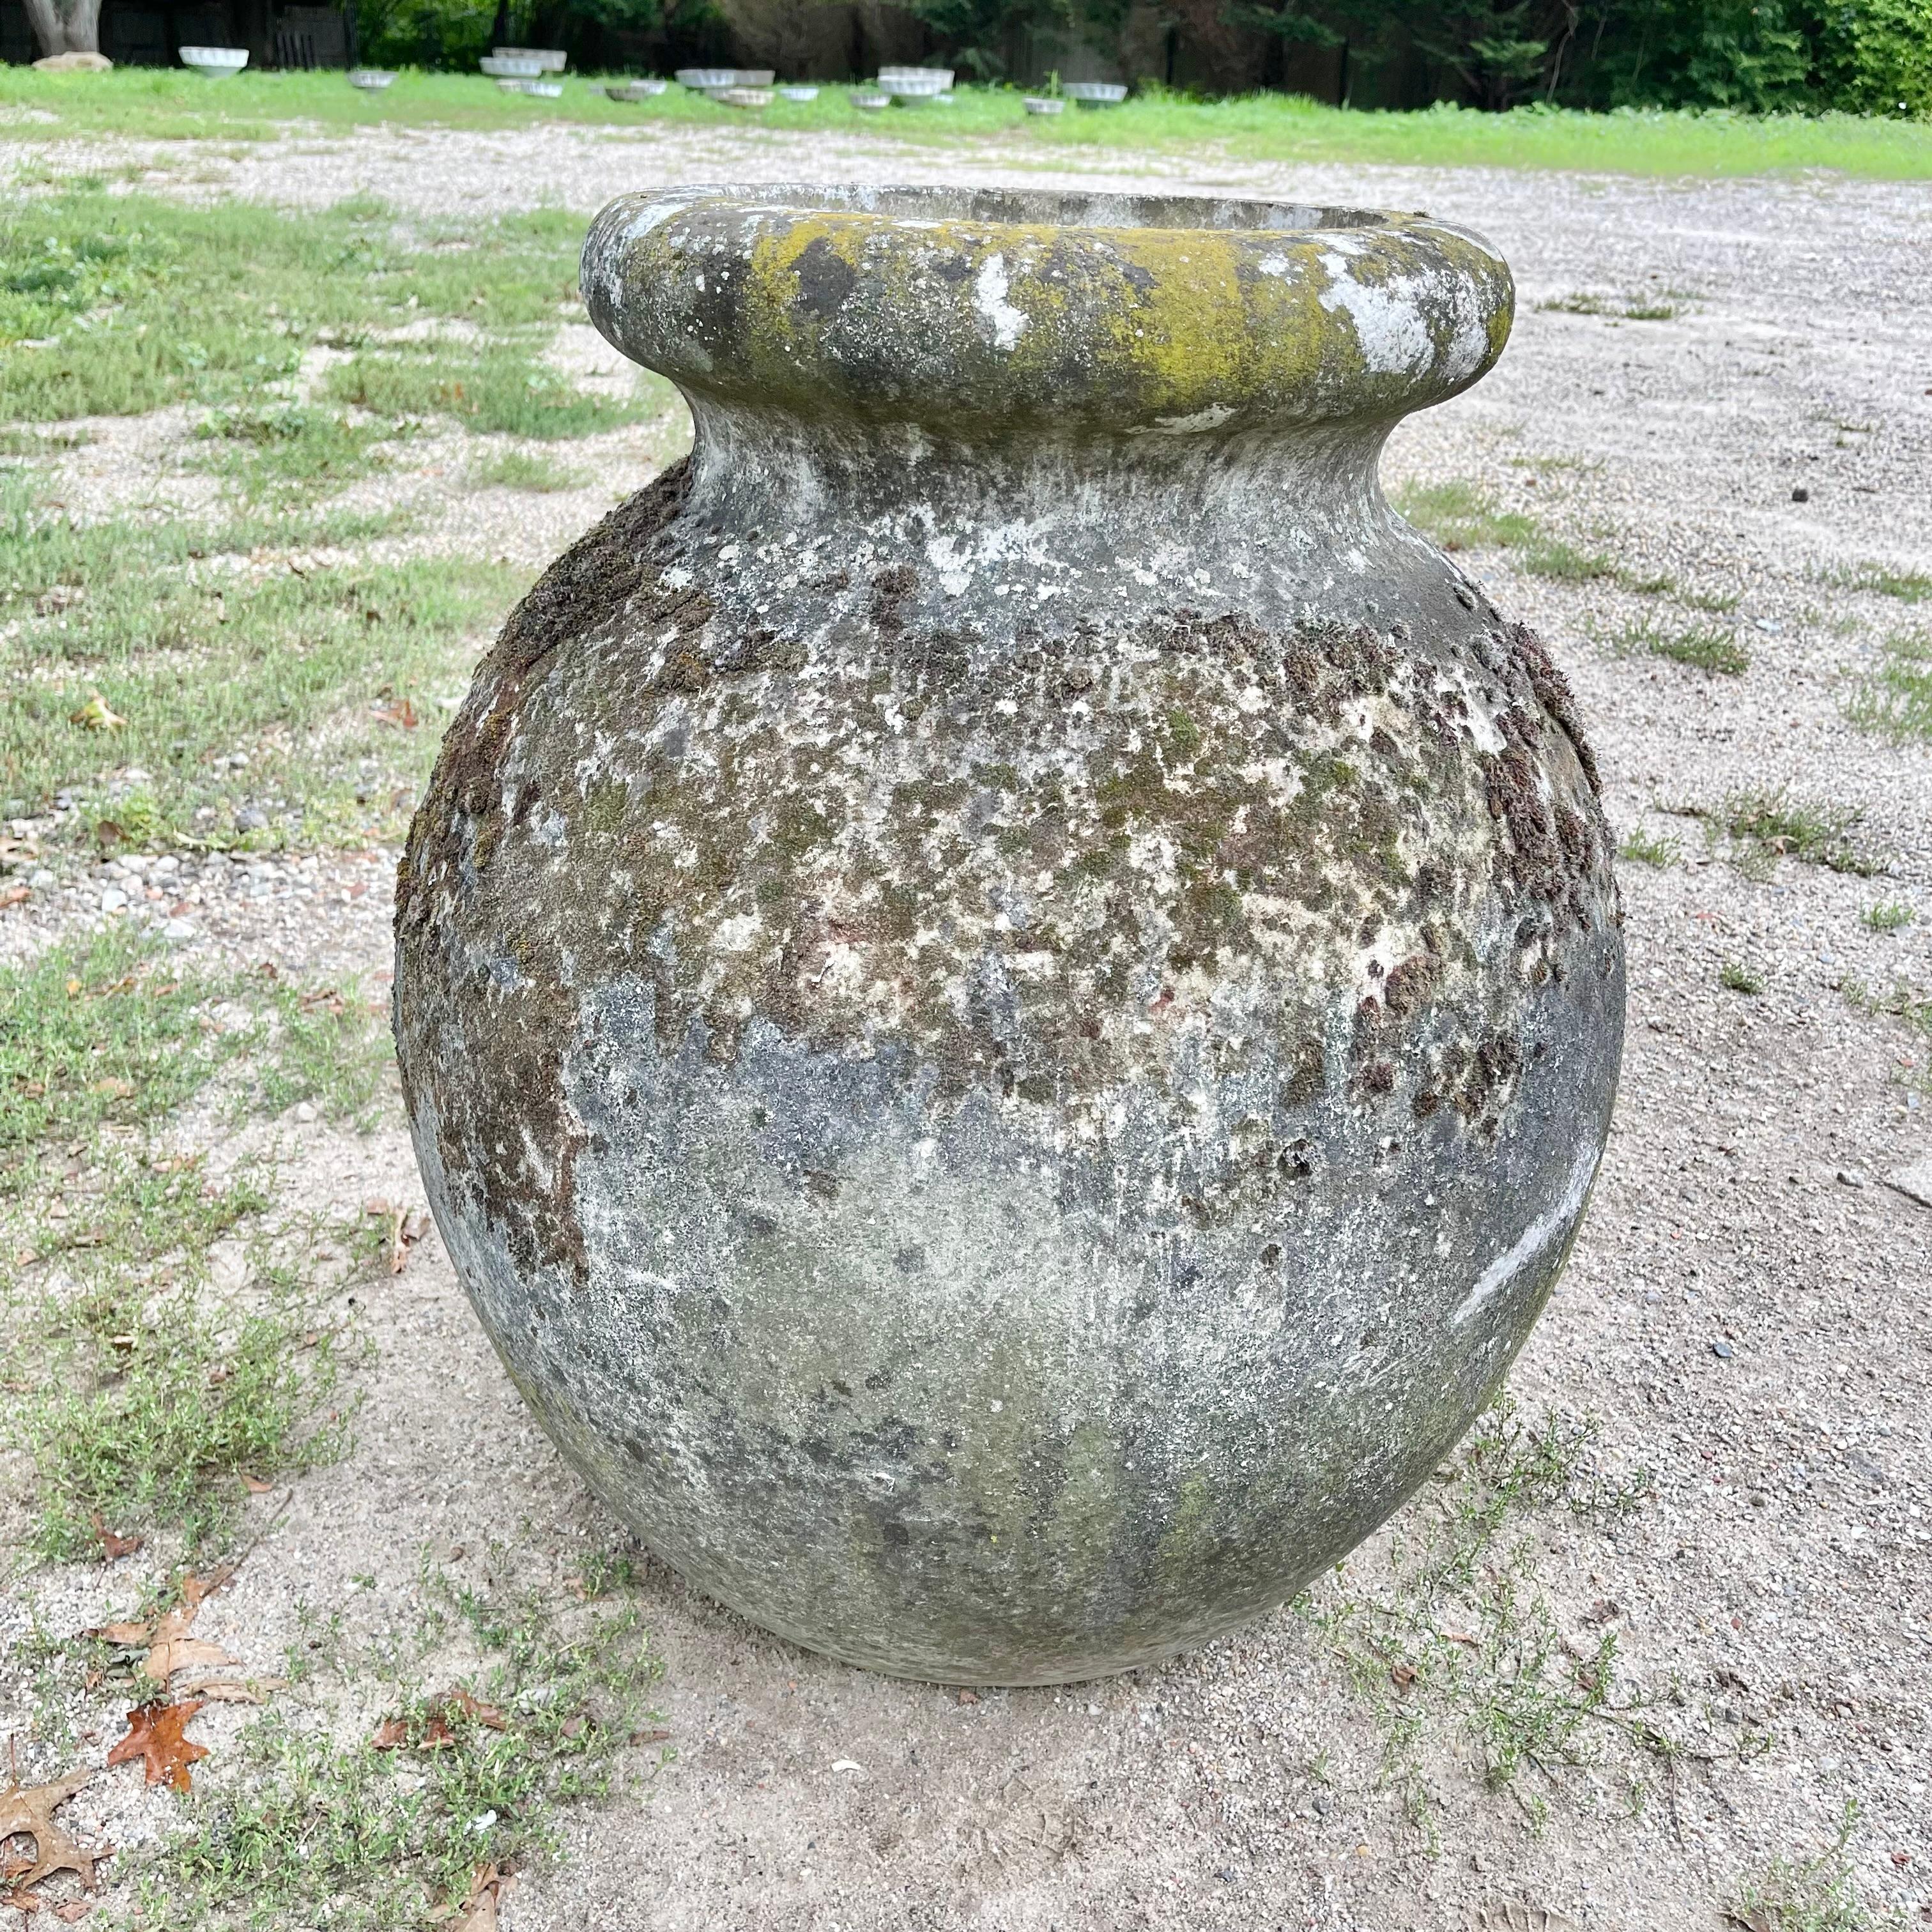 Oversized concrete olive jar planter by Willy Guhl with great patina and prominent presence. Simple and elegant design perfect for any garden or patio. Excellent patina and vintage condition. Smaller option shown for scale, available in separate